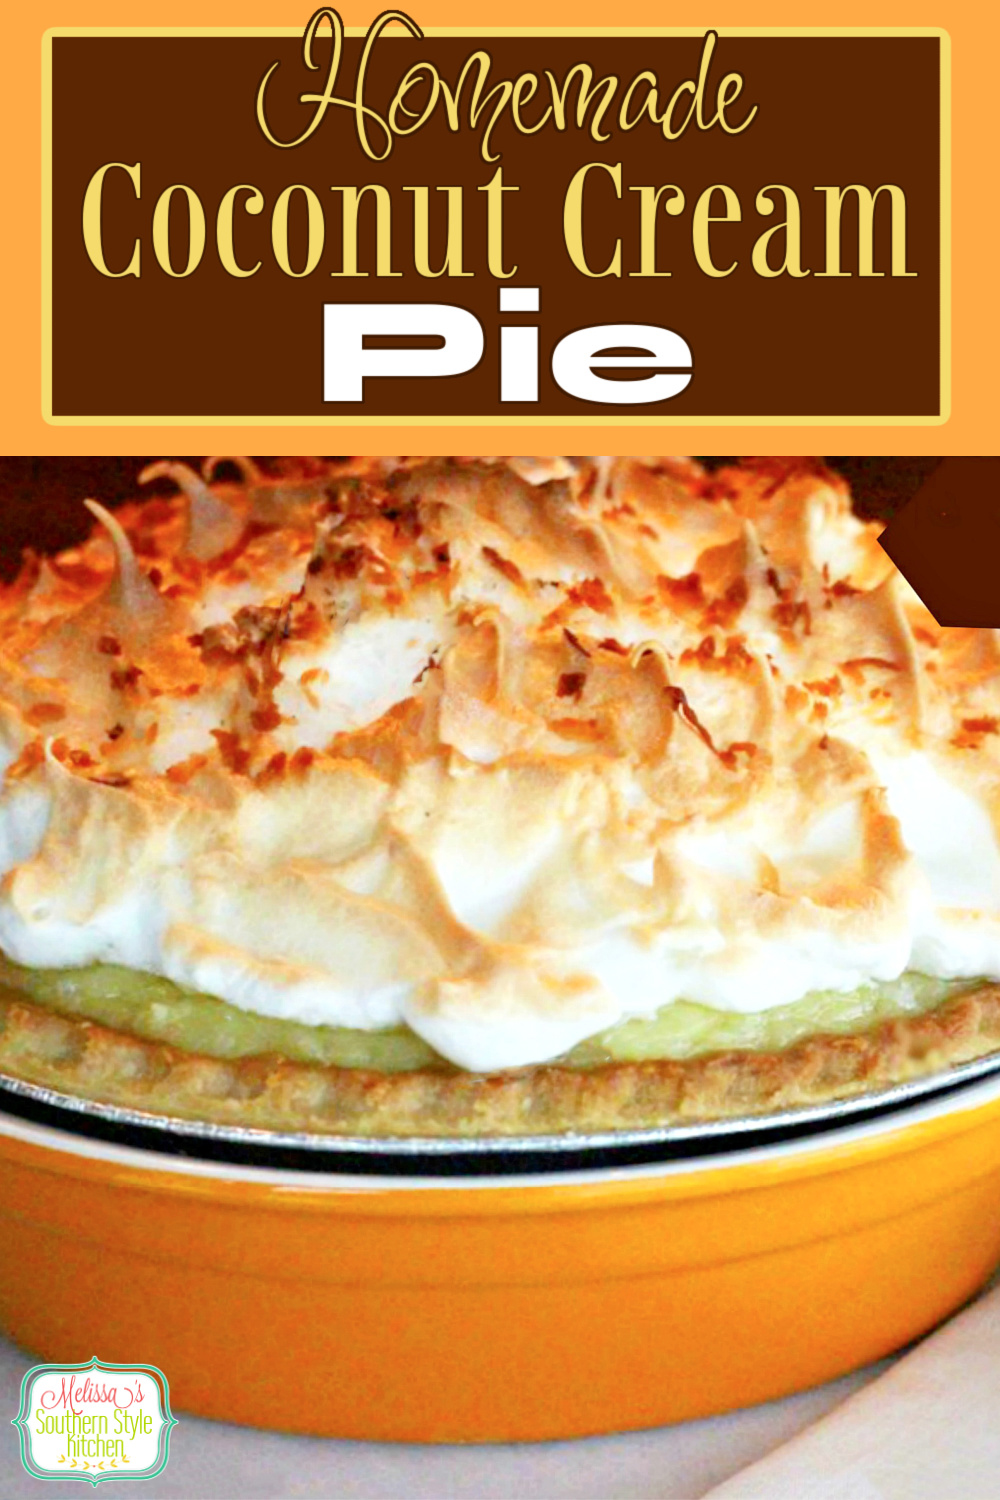 This scratch made Coconut Cream Pie is topped with a fluffy golden mile high meringue for the crowning touch #coconutcream #coconutcreampie #pierecipes #coconutpierecipes #southerndesserts #dessertfoodrecipes via @melissasssk